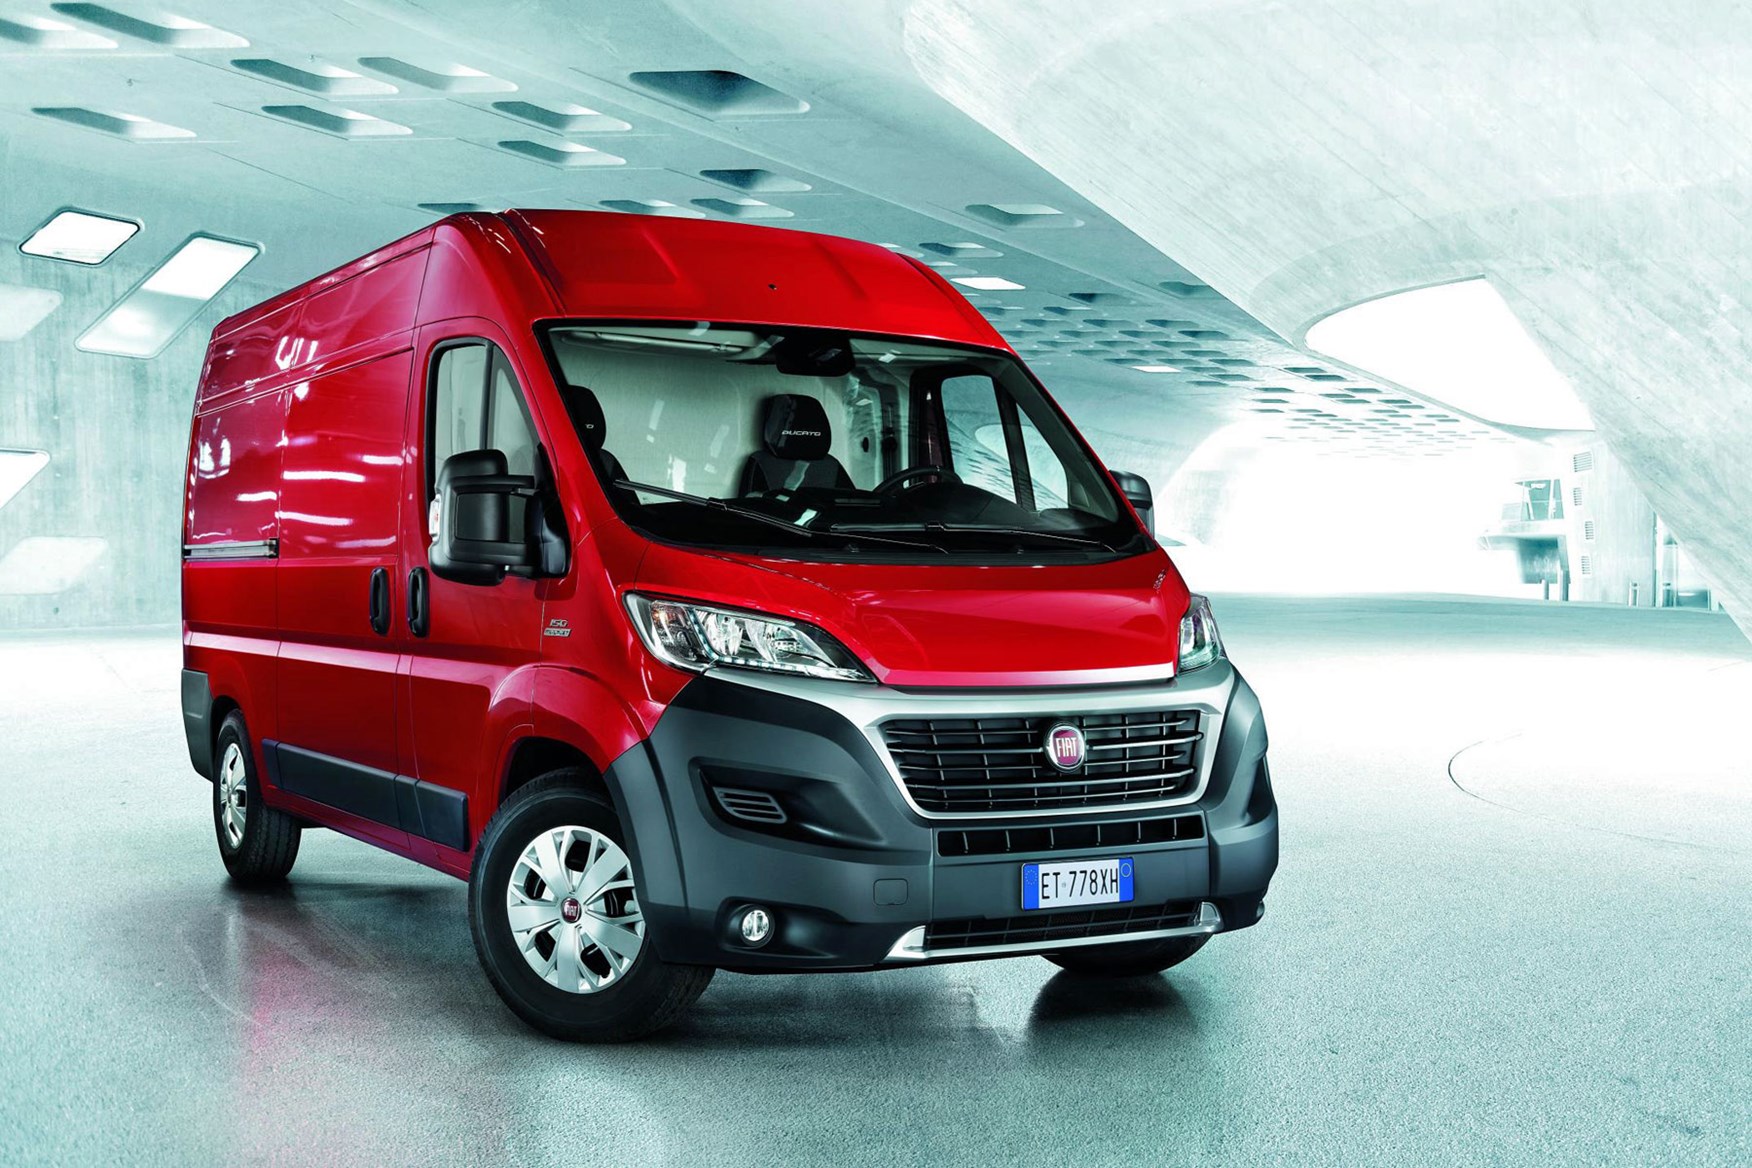 New Van Review  Fiat Ducato - The AA